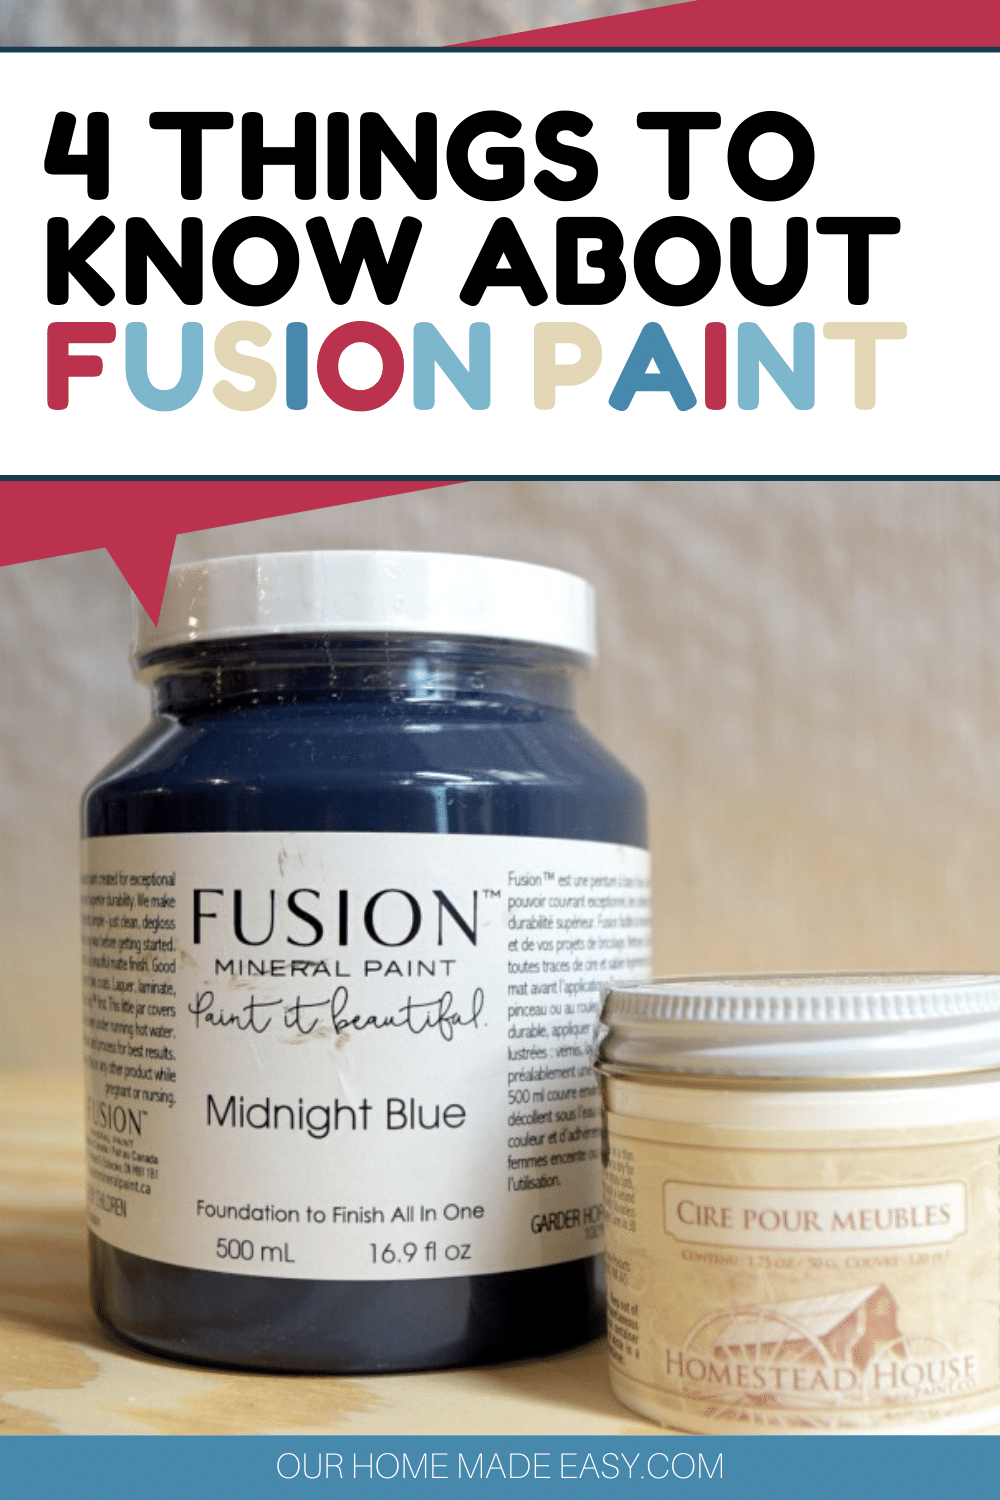 Fusion Mineral Paint-Review - The Mountain View Cottage